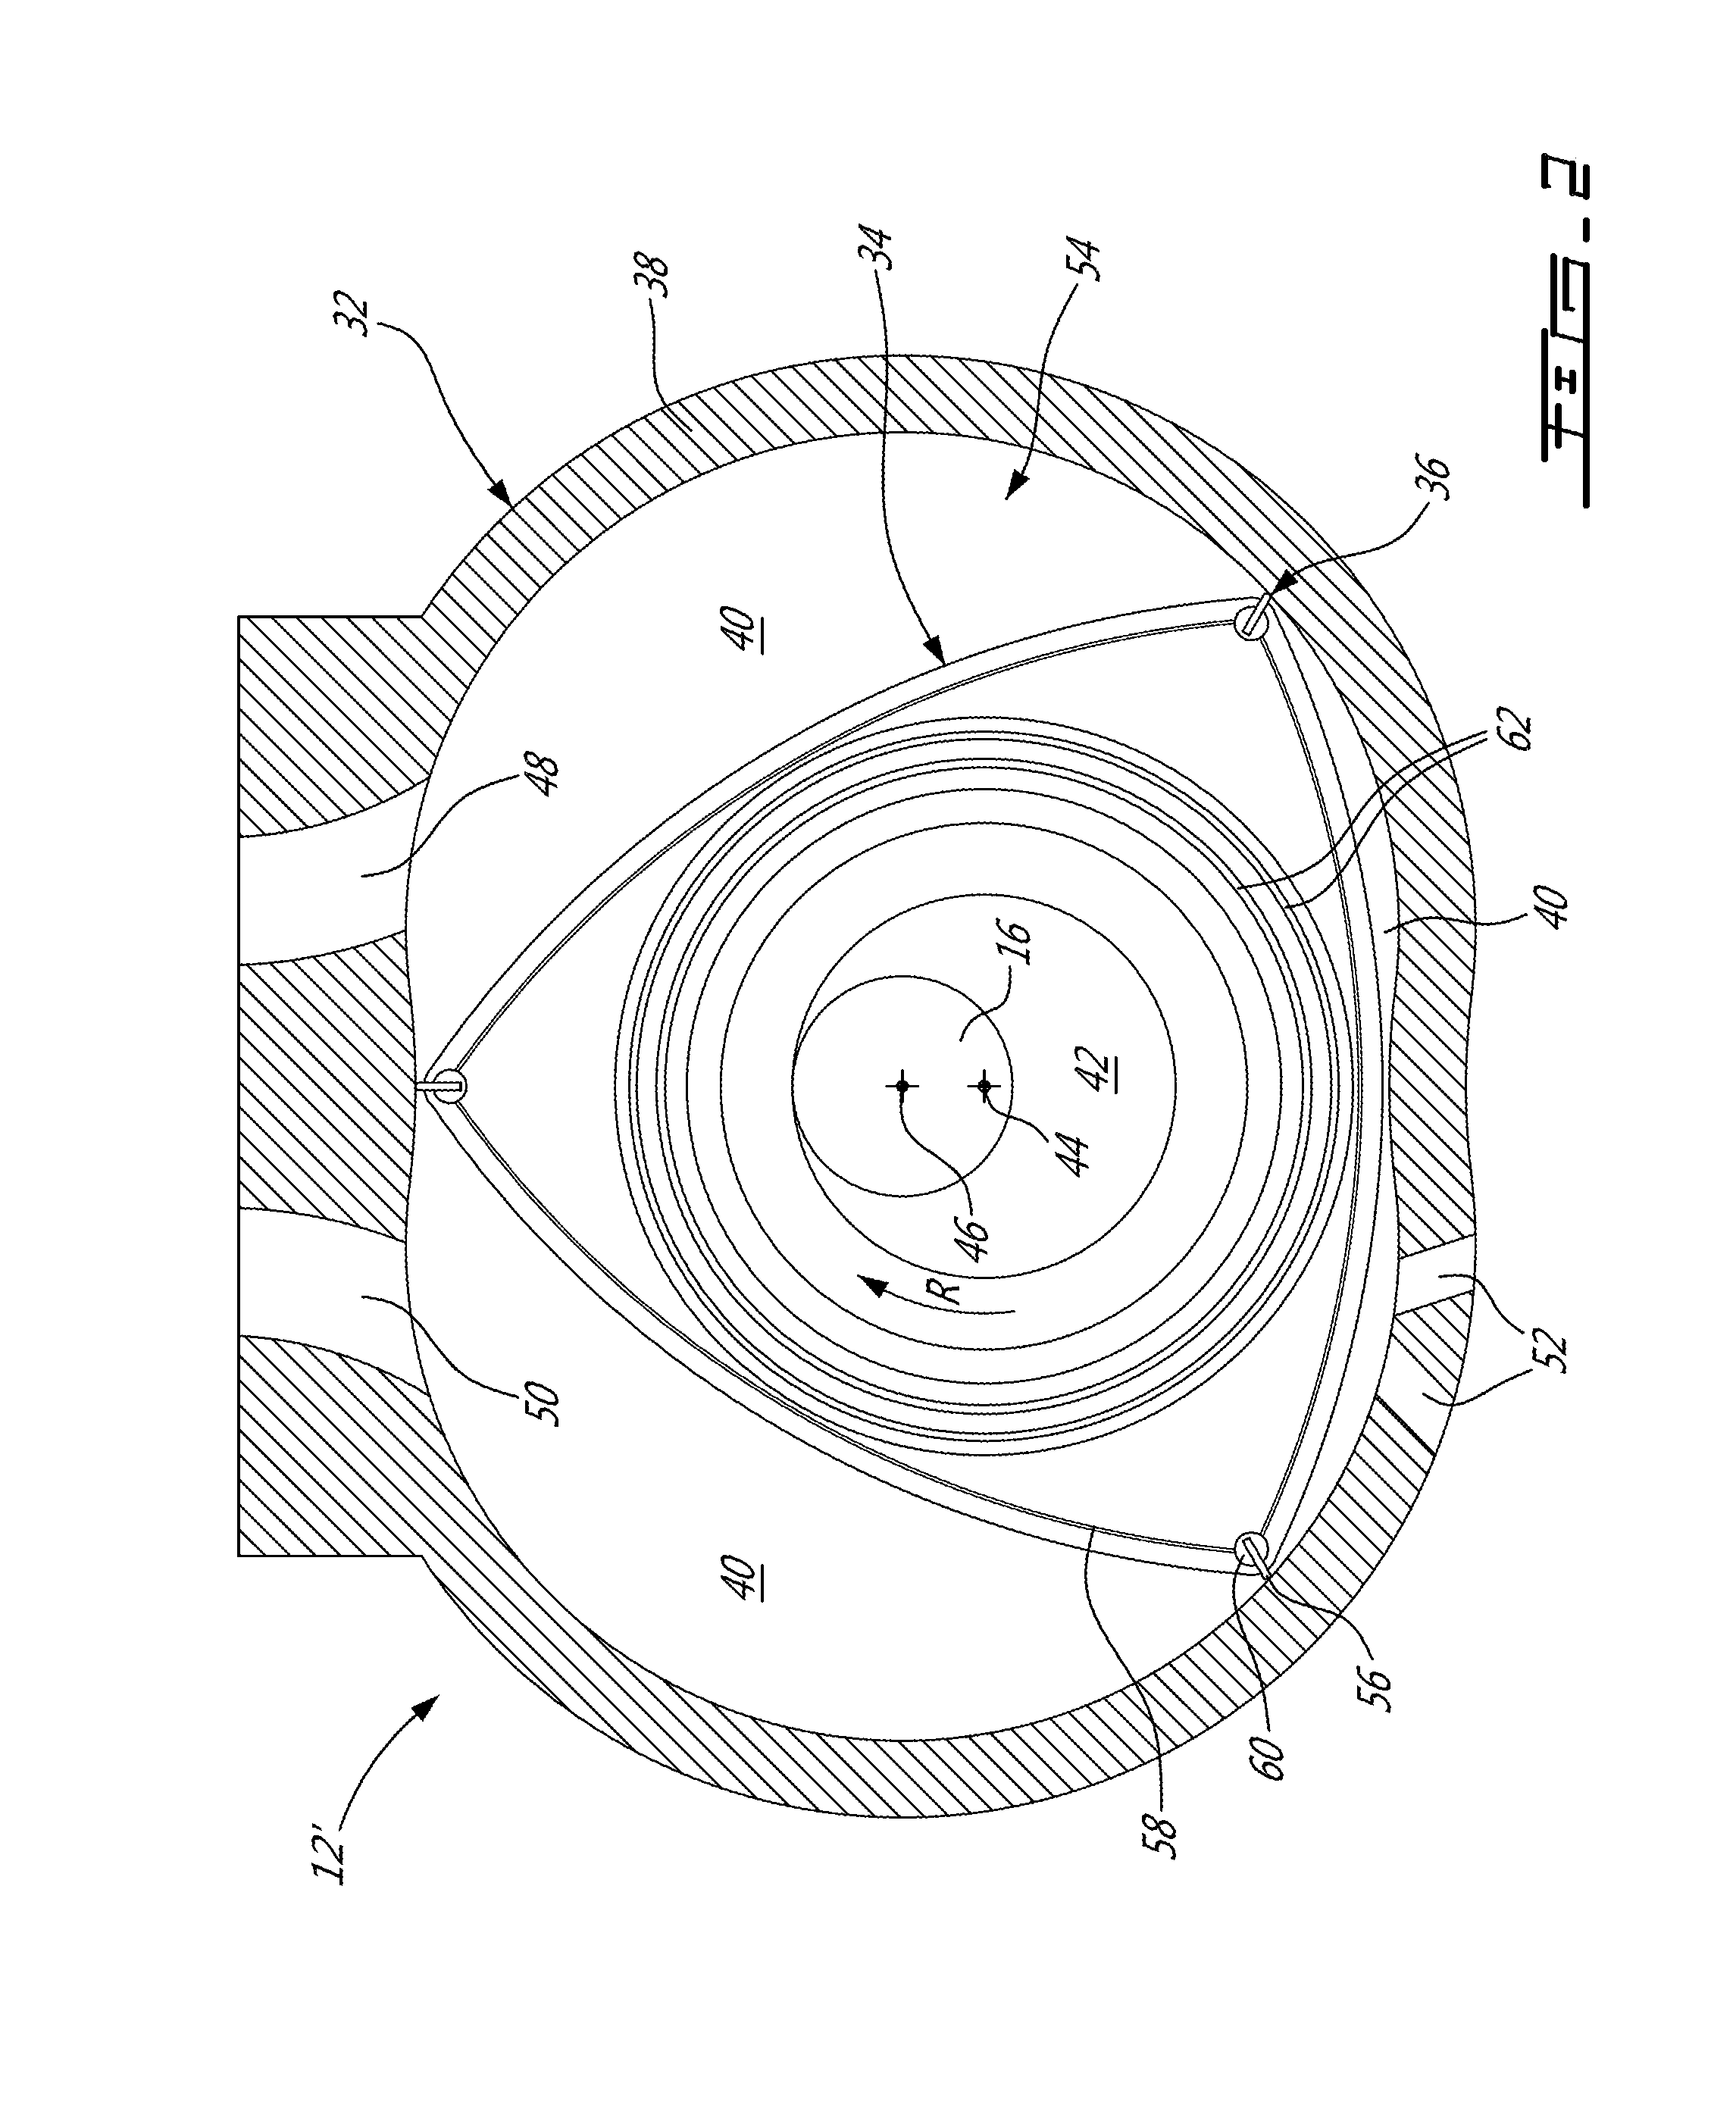 Compound engine assembly with mount cage